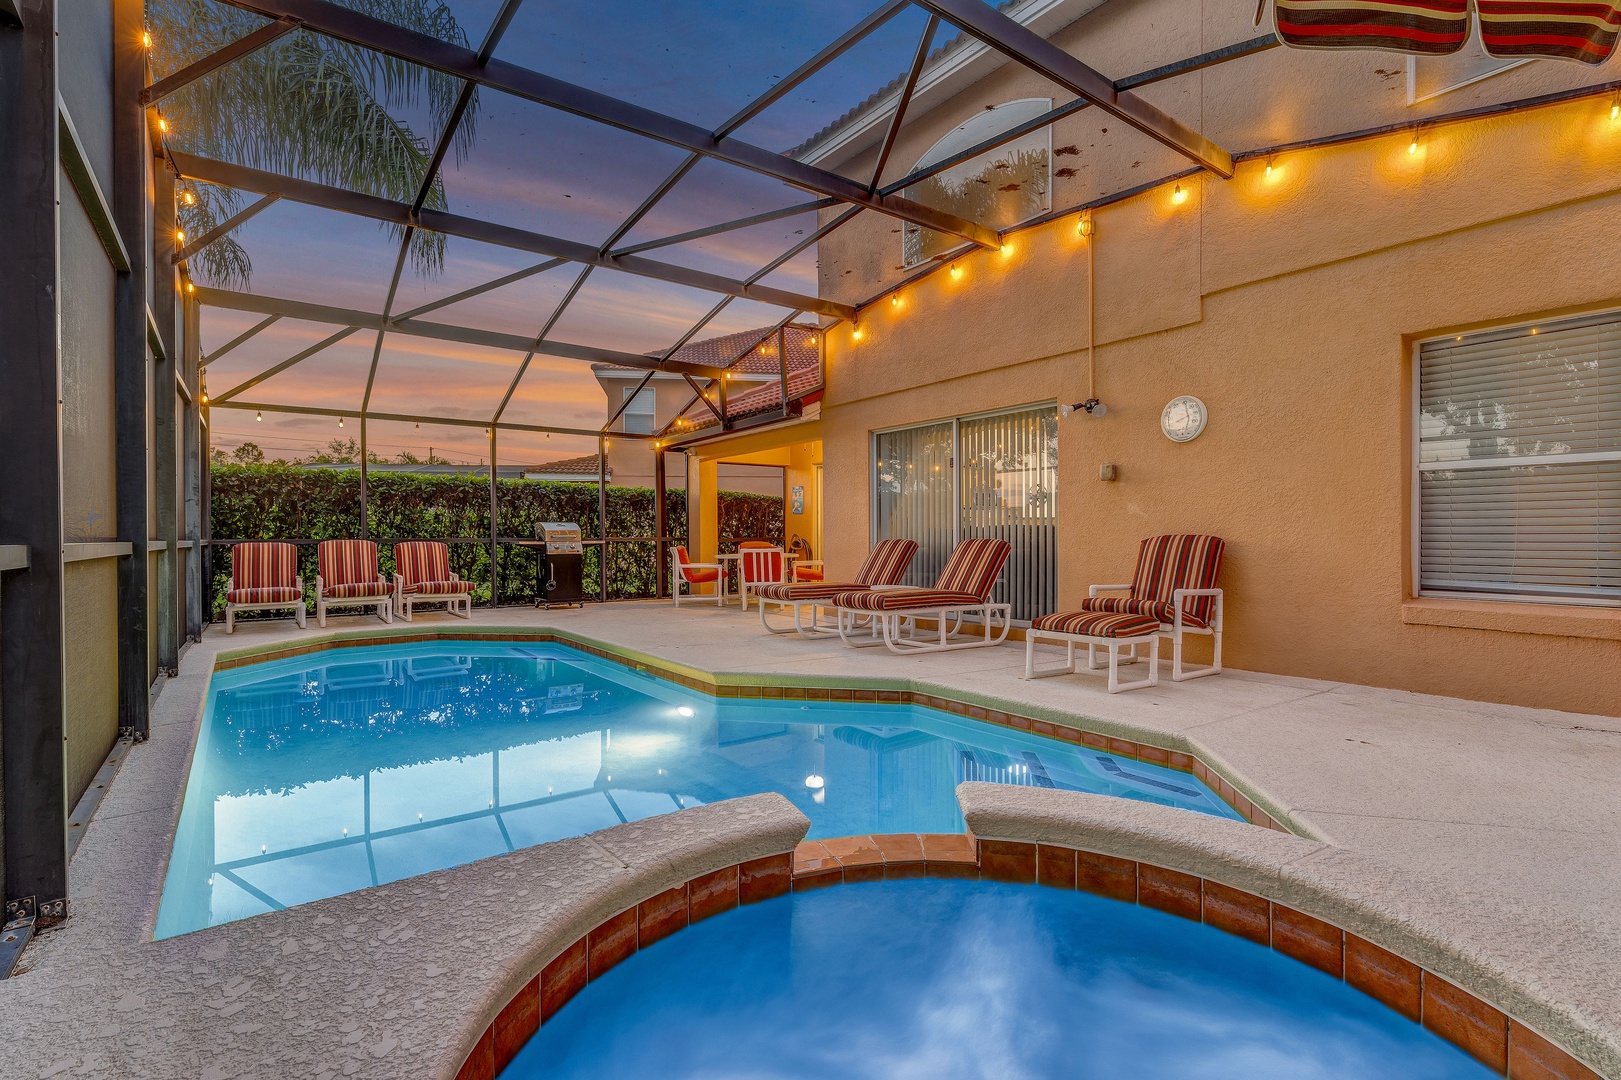 Indulge in tranquility, your private pool and hot tub await